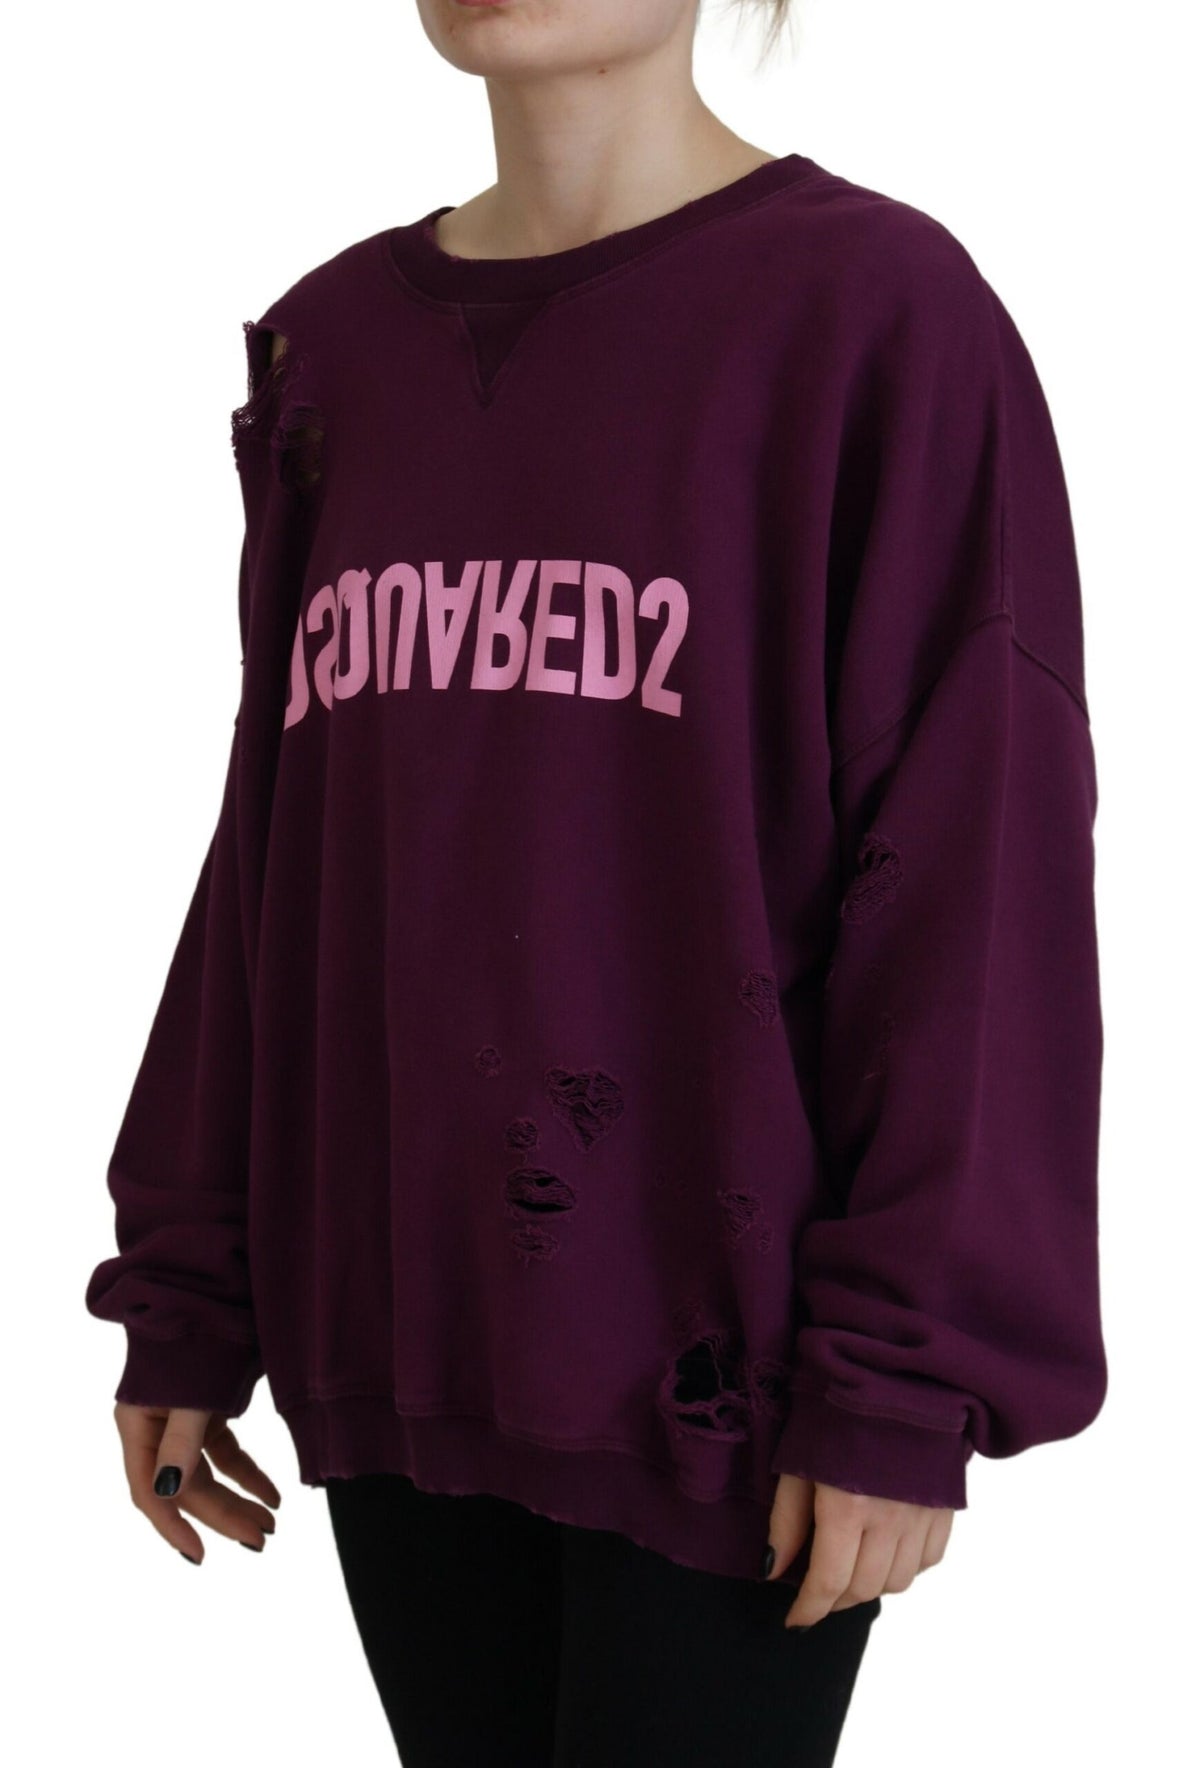 Dsquared² Purple Cotton Distressed Printed Long Sleeve Sweater